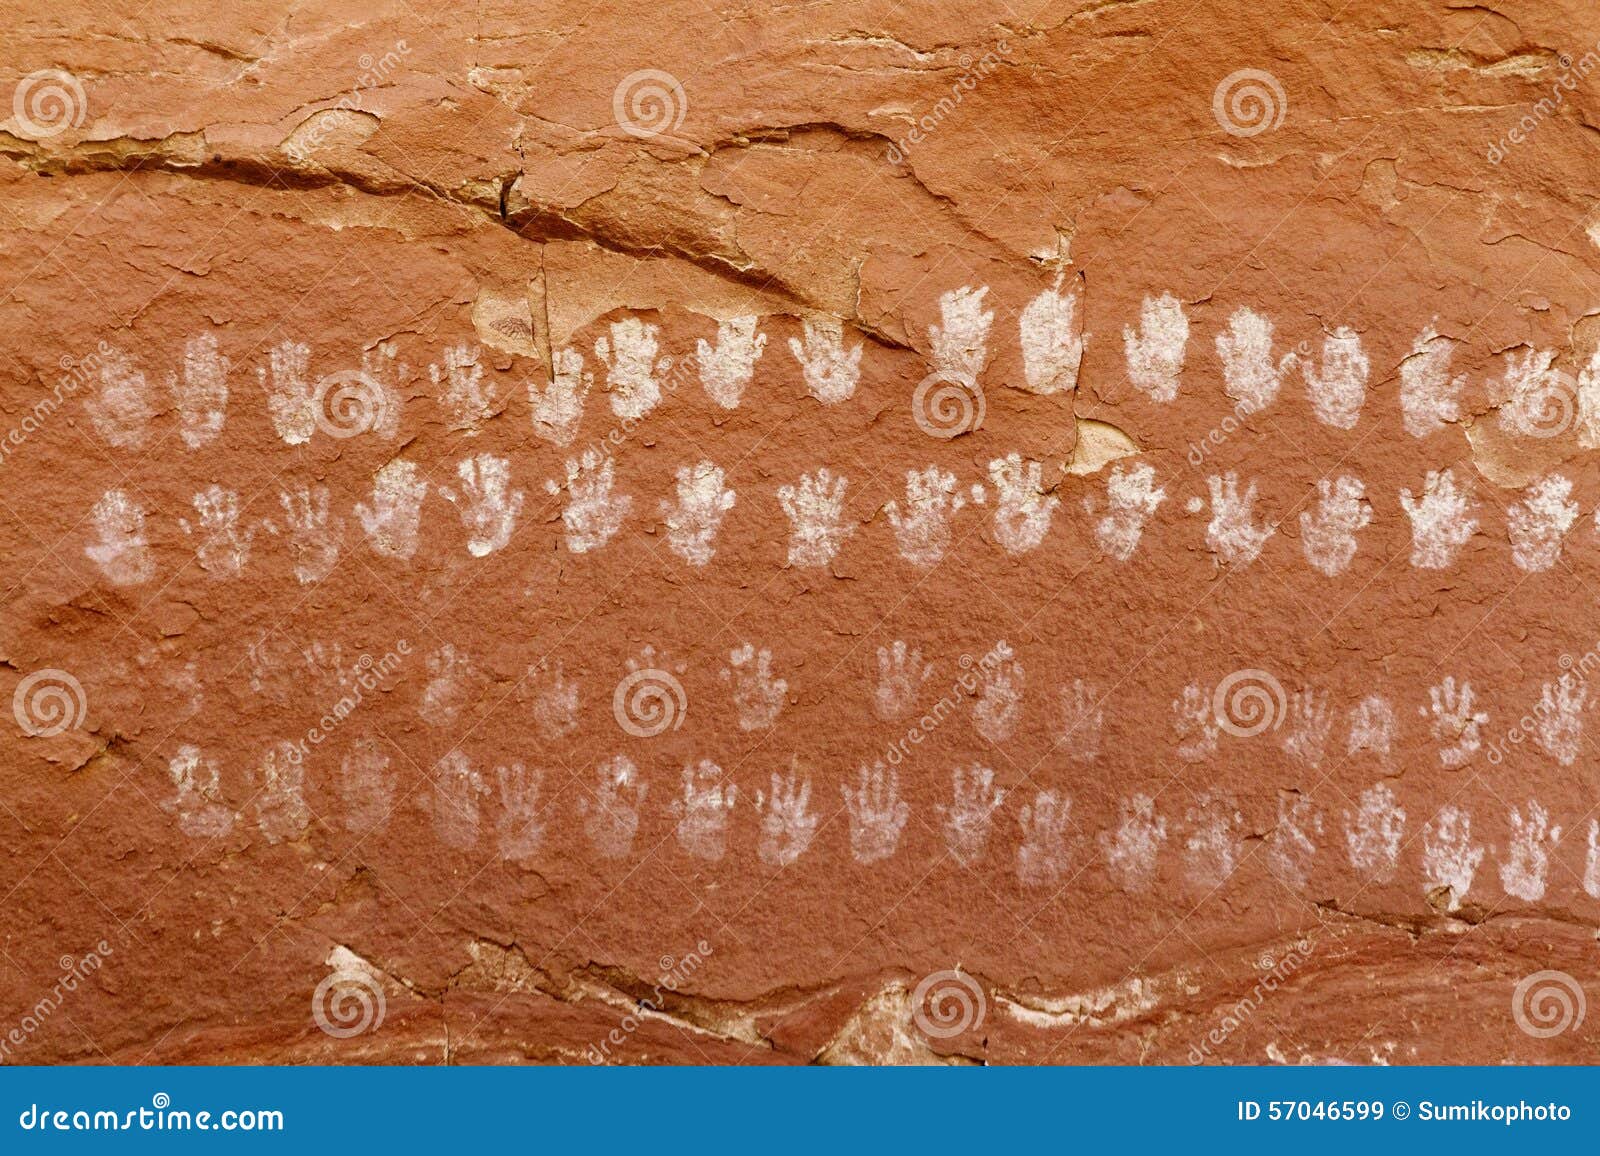 hundred hands pictograph